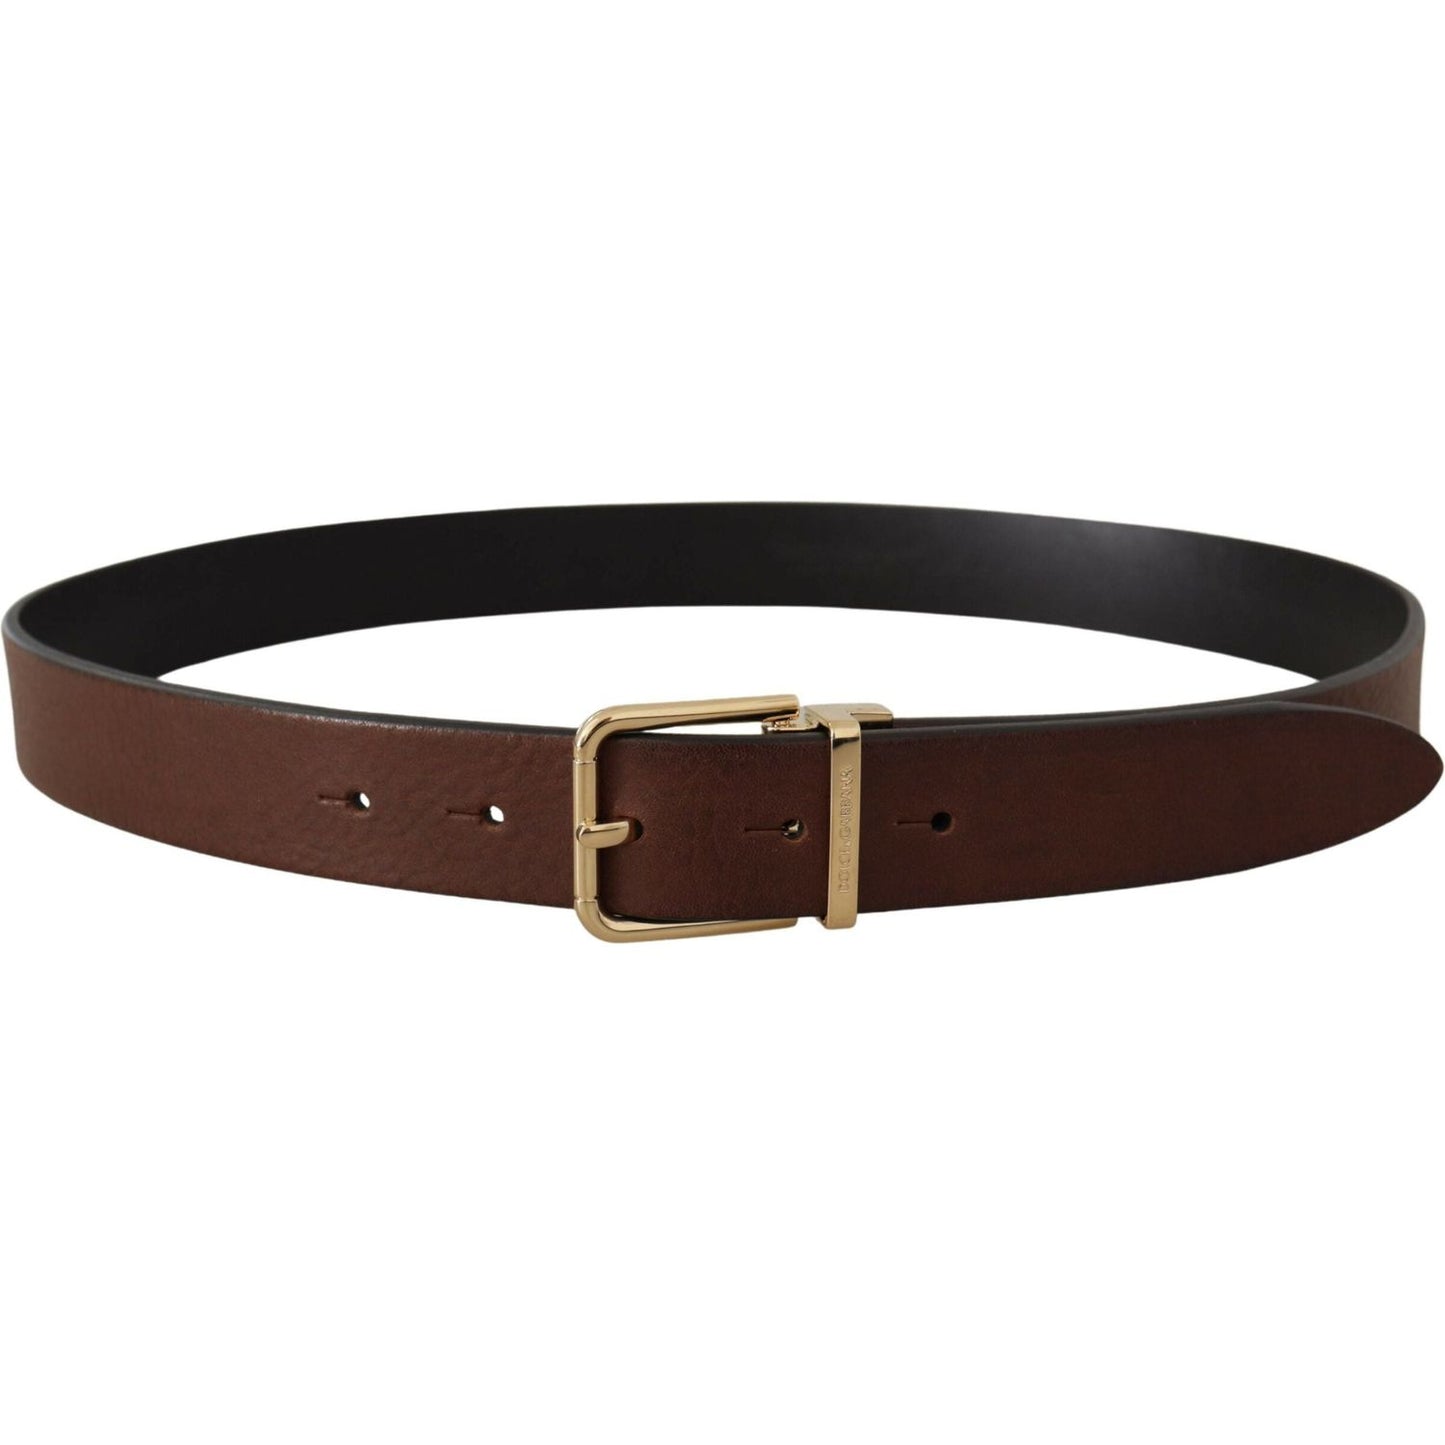 Dolce & Gabbana Elegant Brown Leather Belt with Metal Buckle brown-classic-leather-gold-tone-metal-buckle-belt IMG_7183-scaled-c578ddf7-e82.jpg